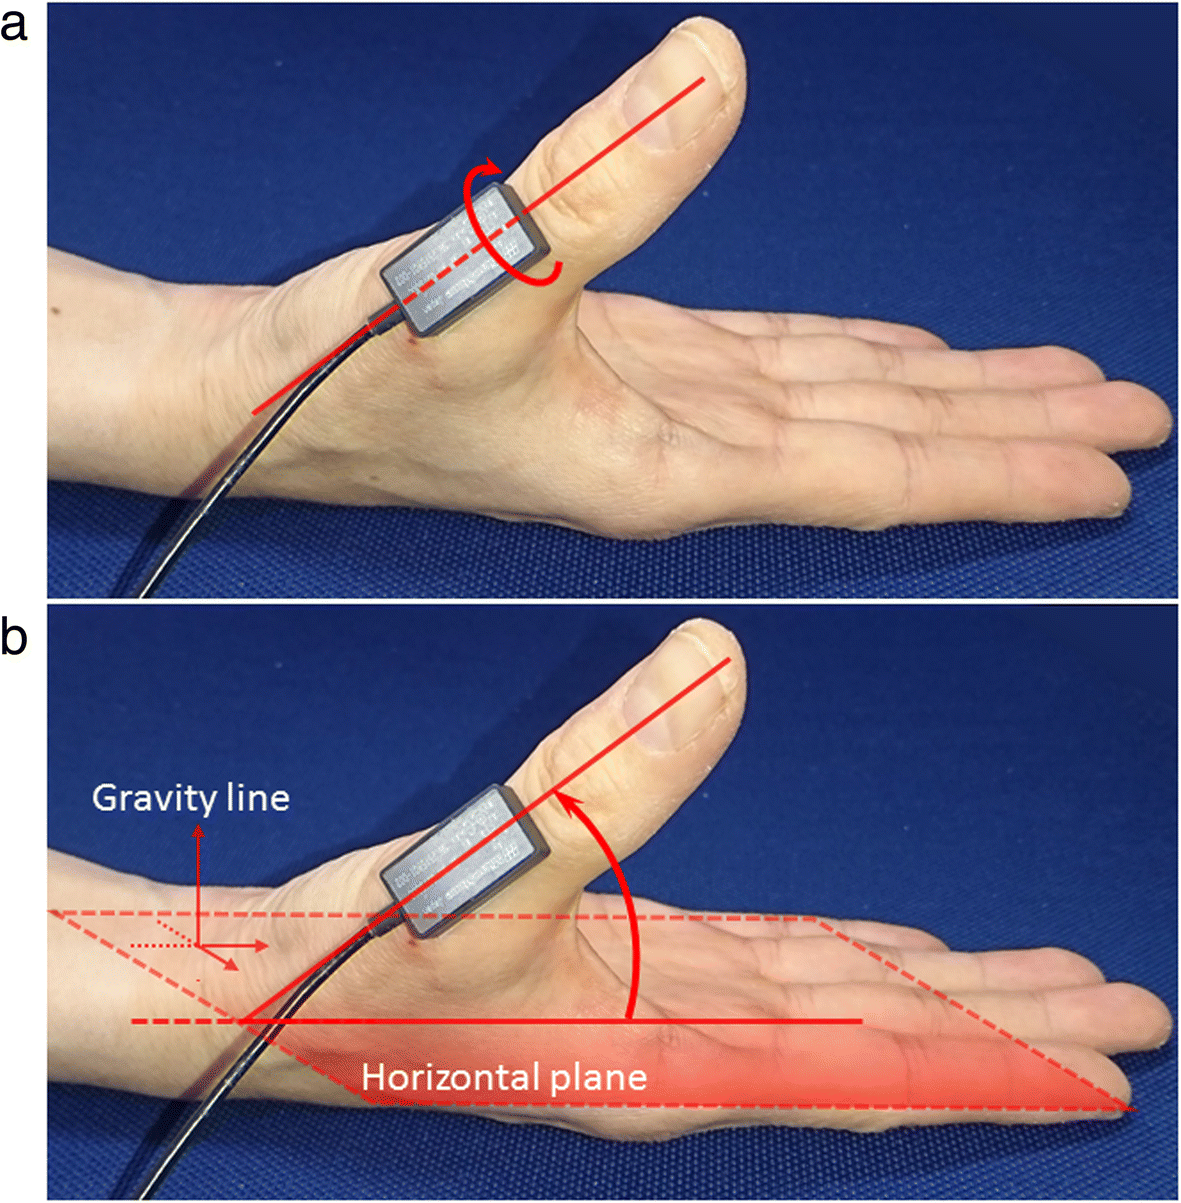 a-new-method-of-measuring-the-thumb-pronation-and-palmar-abduction-angles-during-opposition